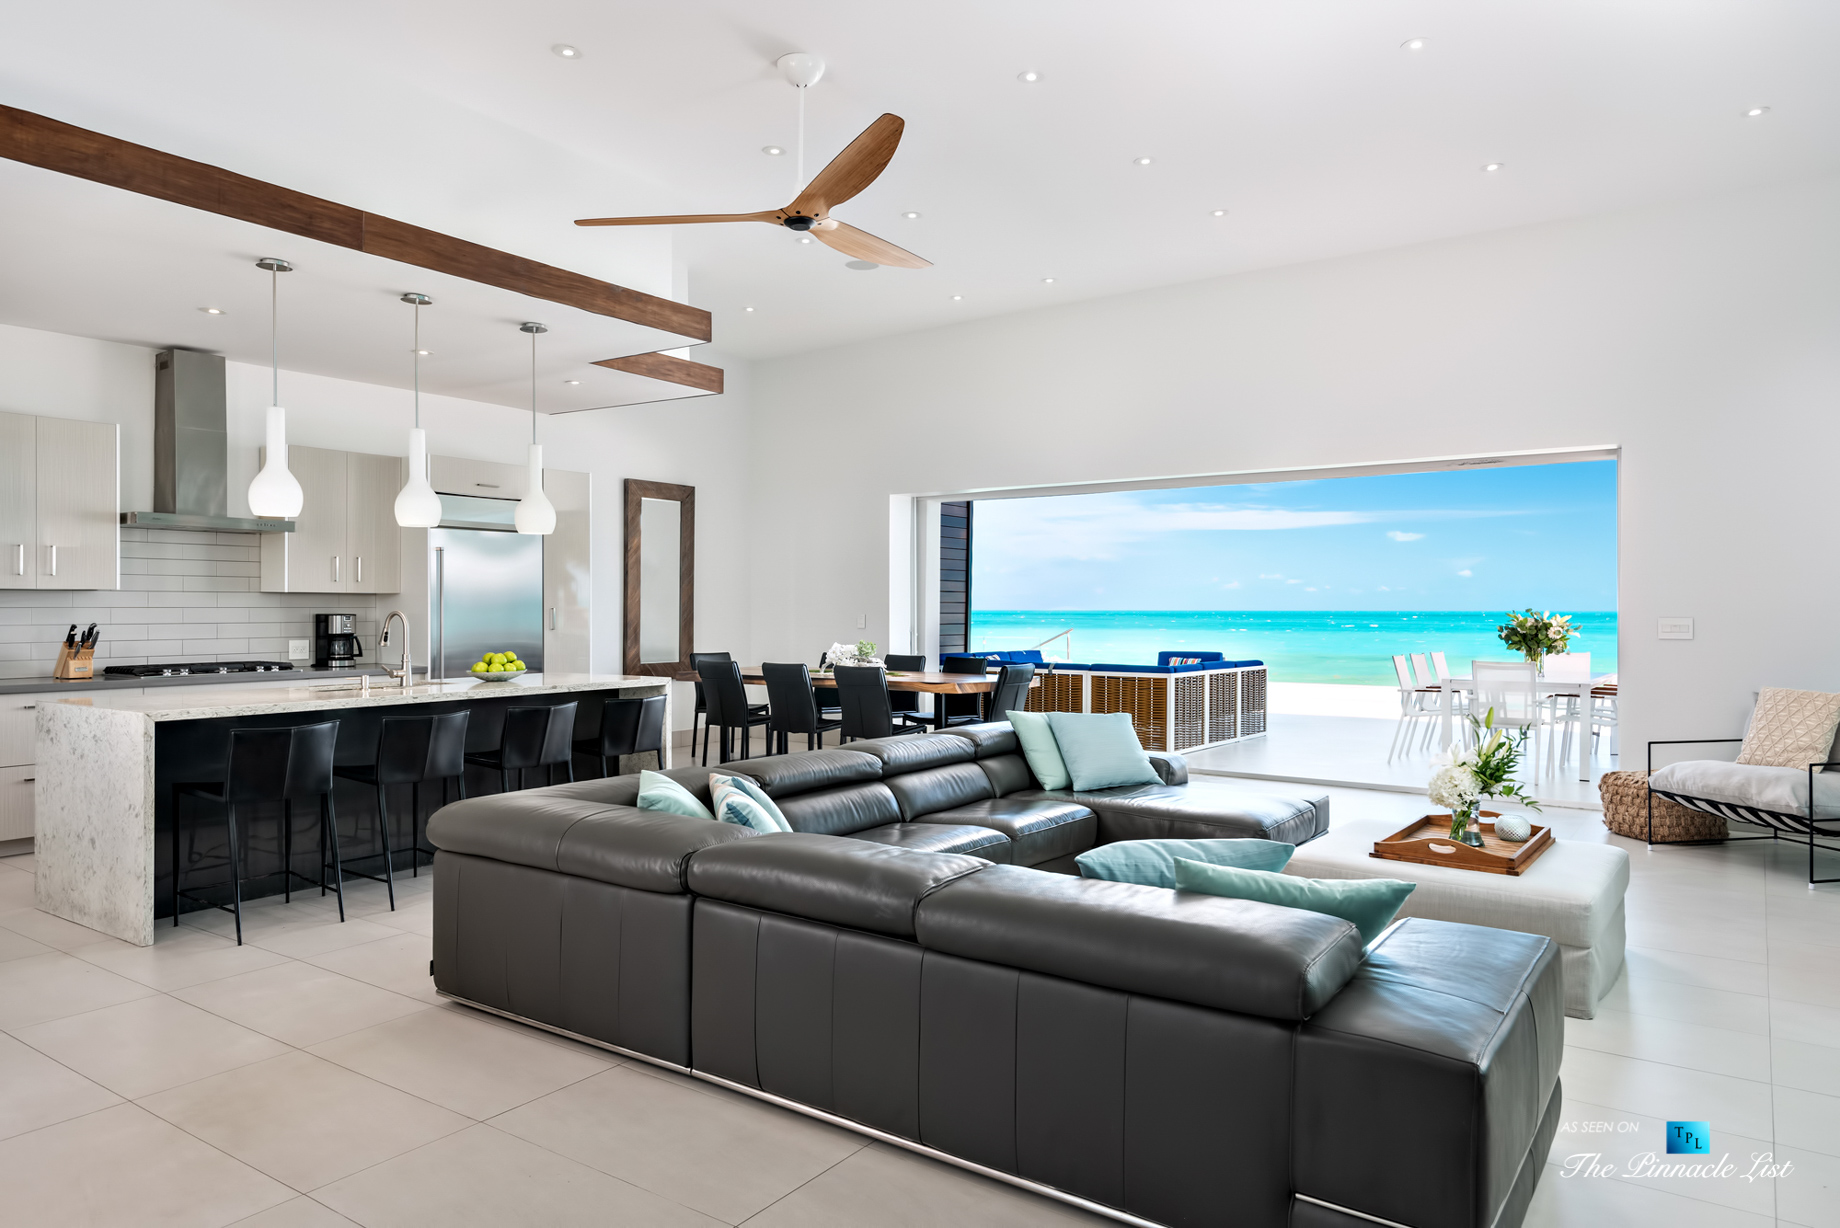 Tip of the Tail Villa – Providenciales, Turks and Caicos Islands – Caribbean House Kitchen and Living Room – Luxury Real Estate – South Shore Peninsula Home